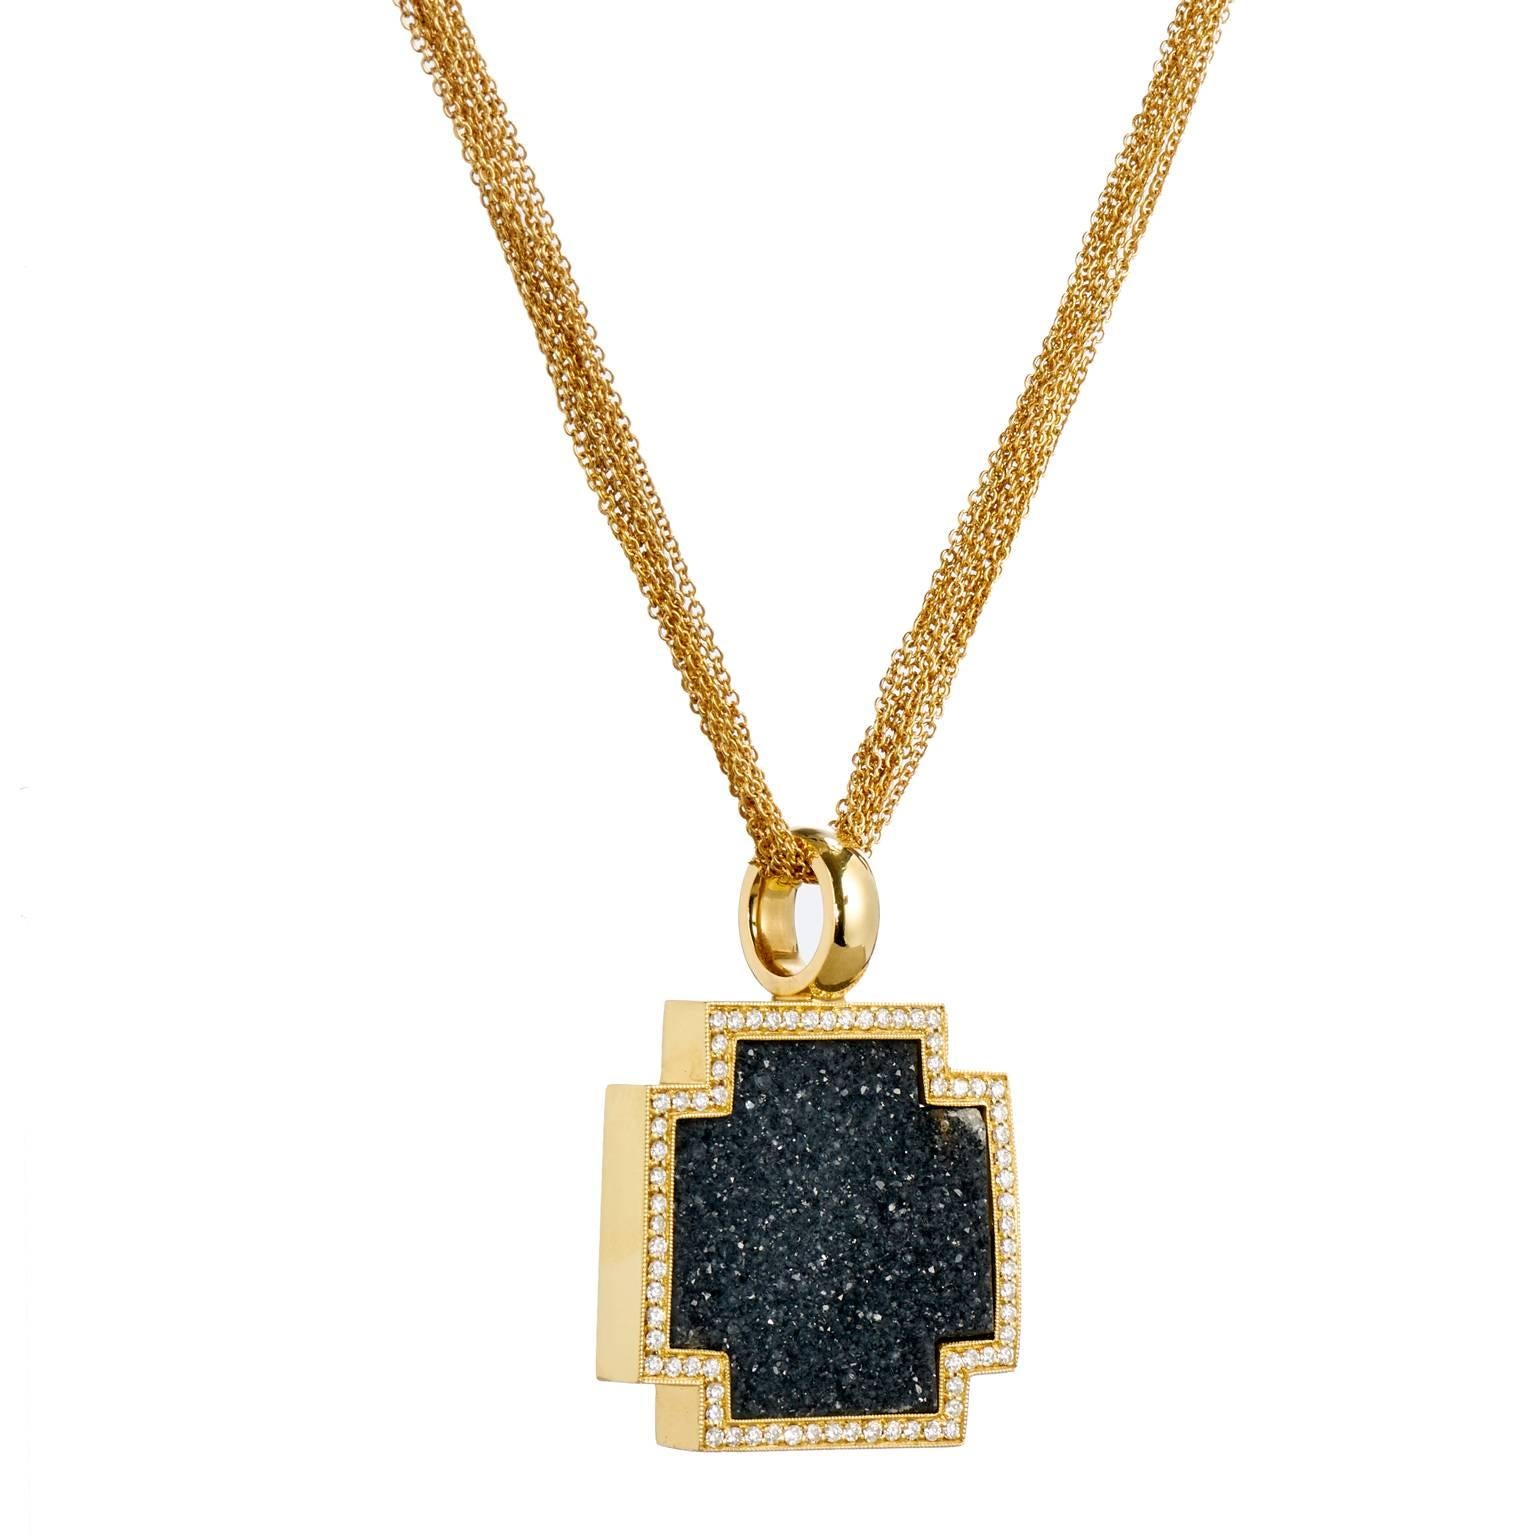 Crafted in 18kt yellow gold, this pendant features a gorgeous piece of black agate druzy surrounded by .76ct of G/H VS graded diamond pave.  This is a handmade, one-of-kind design by H&H.